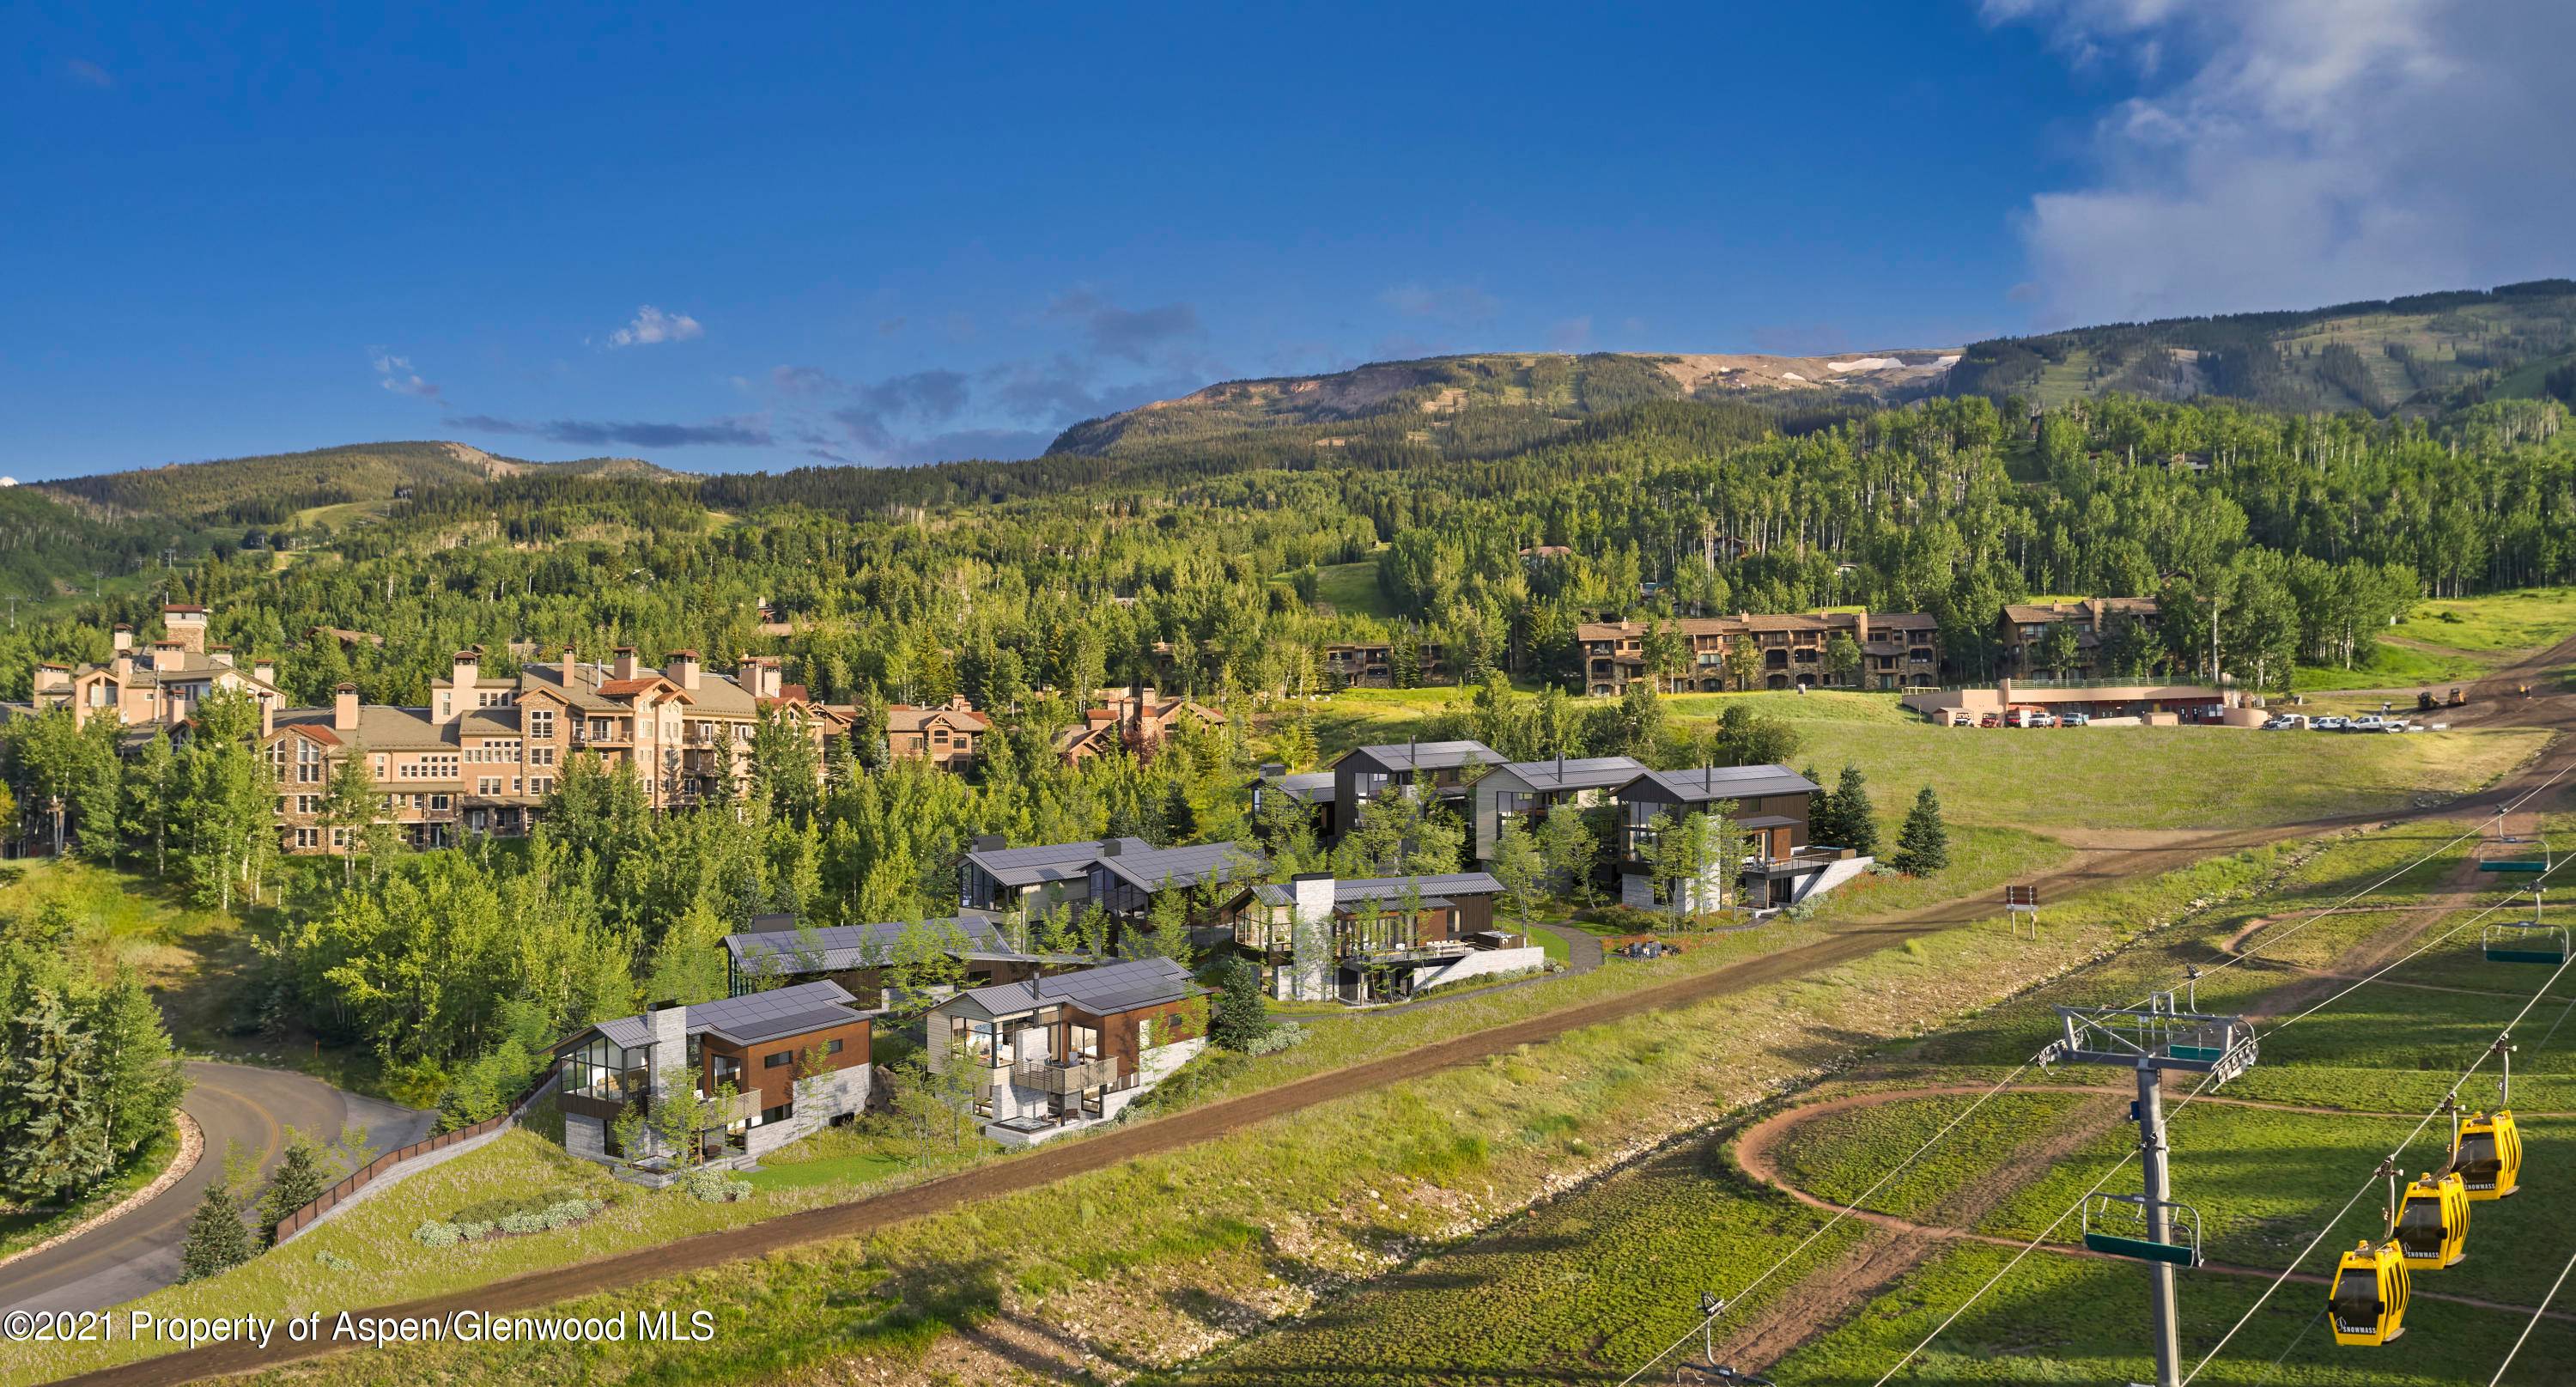 Situated right at the edge of the community's Aspen Grove, this 3 bedroom home is surrounded by verdant aspen trees and natural landscaping, creating an unparalleled sense of privacy.